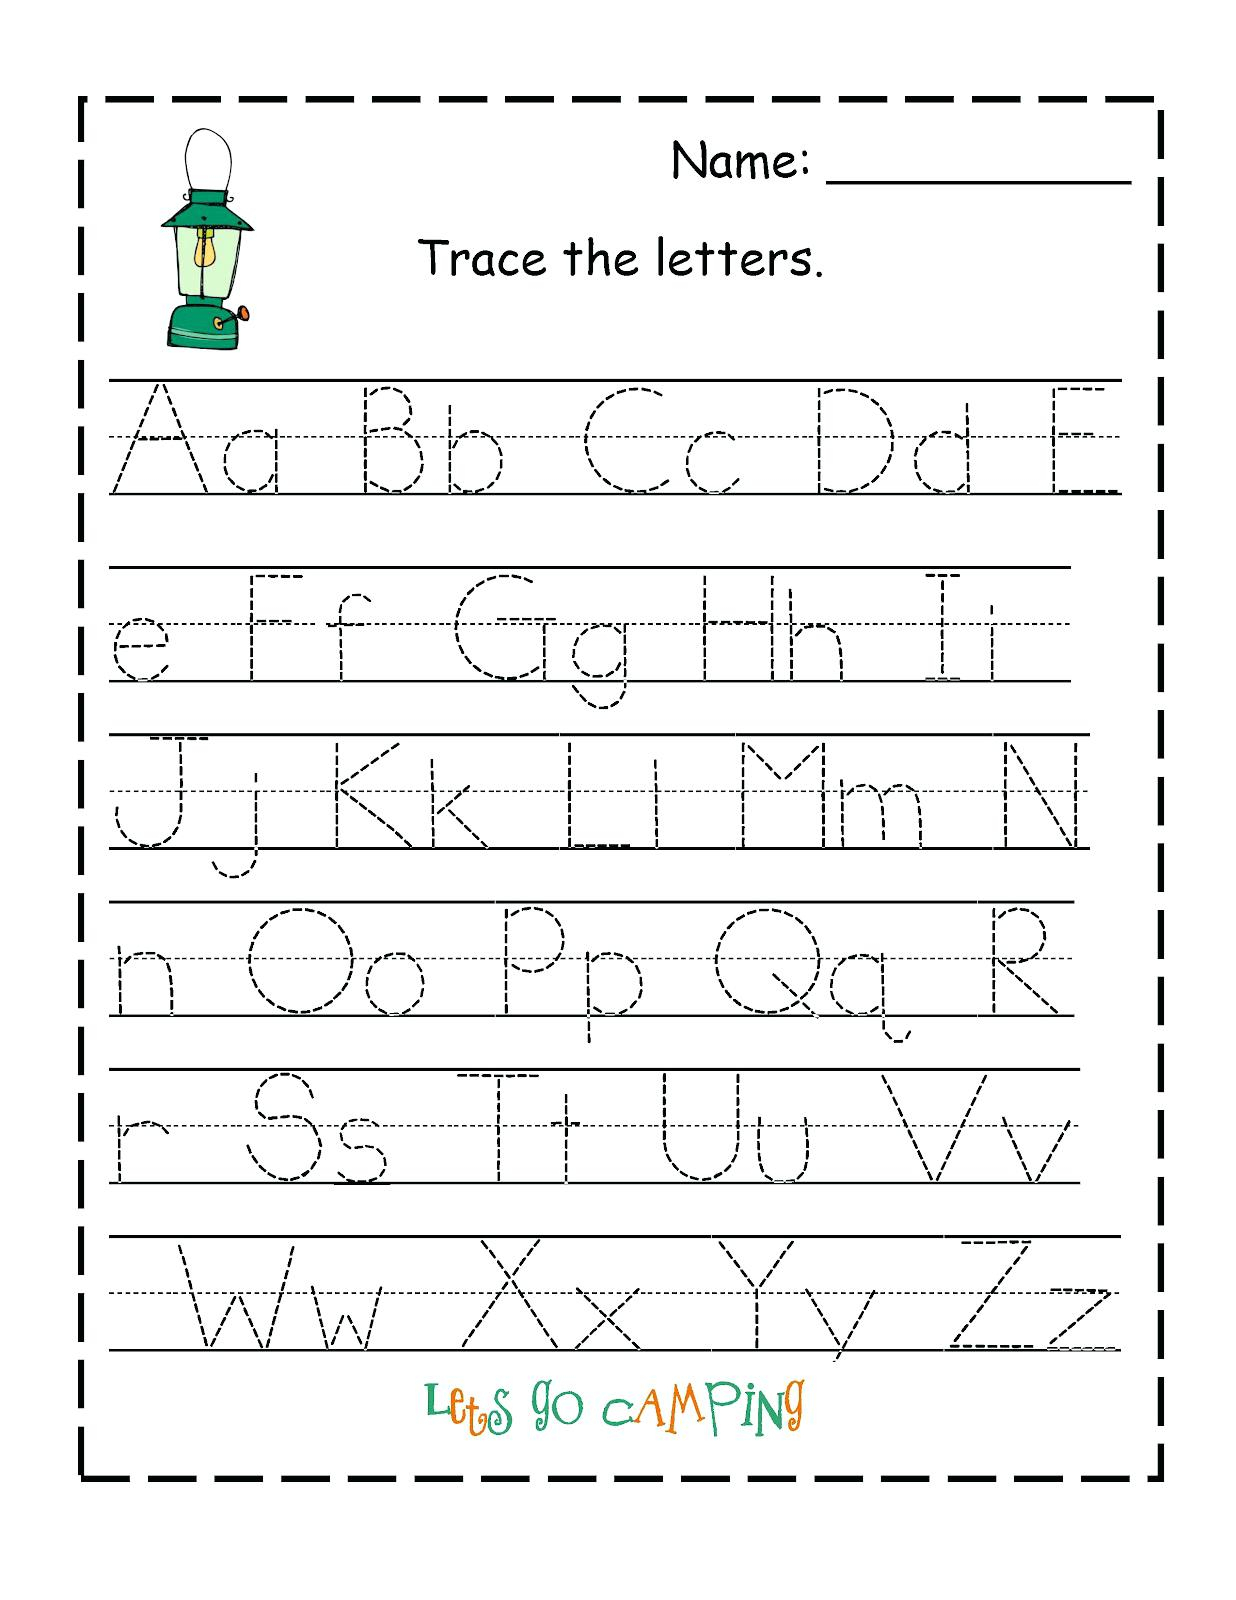 Arabic Alphabet Worksheets - Wpa.wpart.co throughout Tracing Letters Download